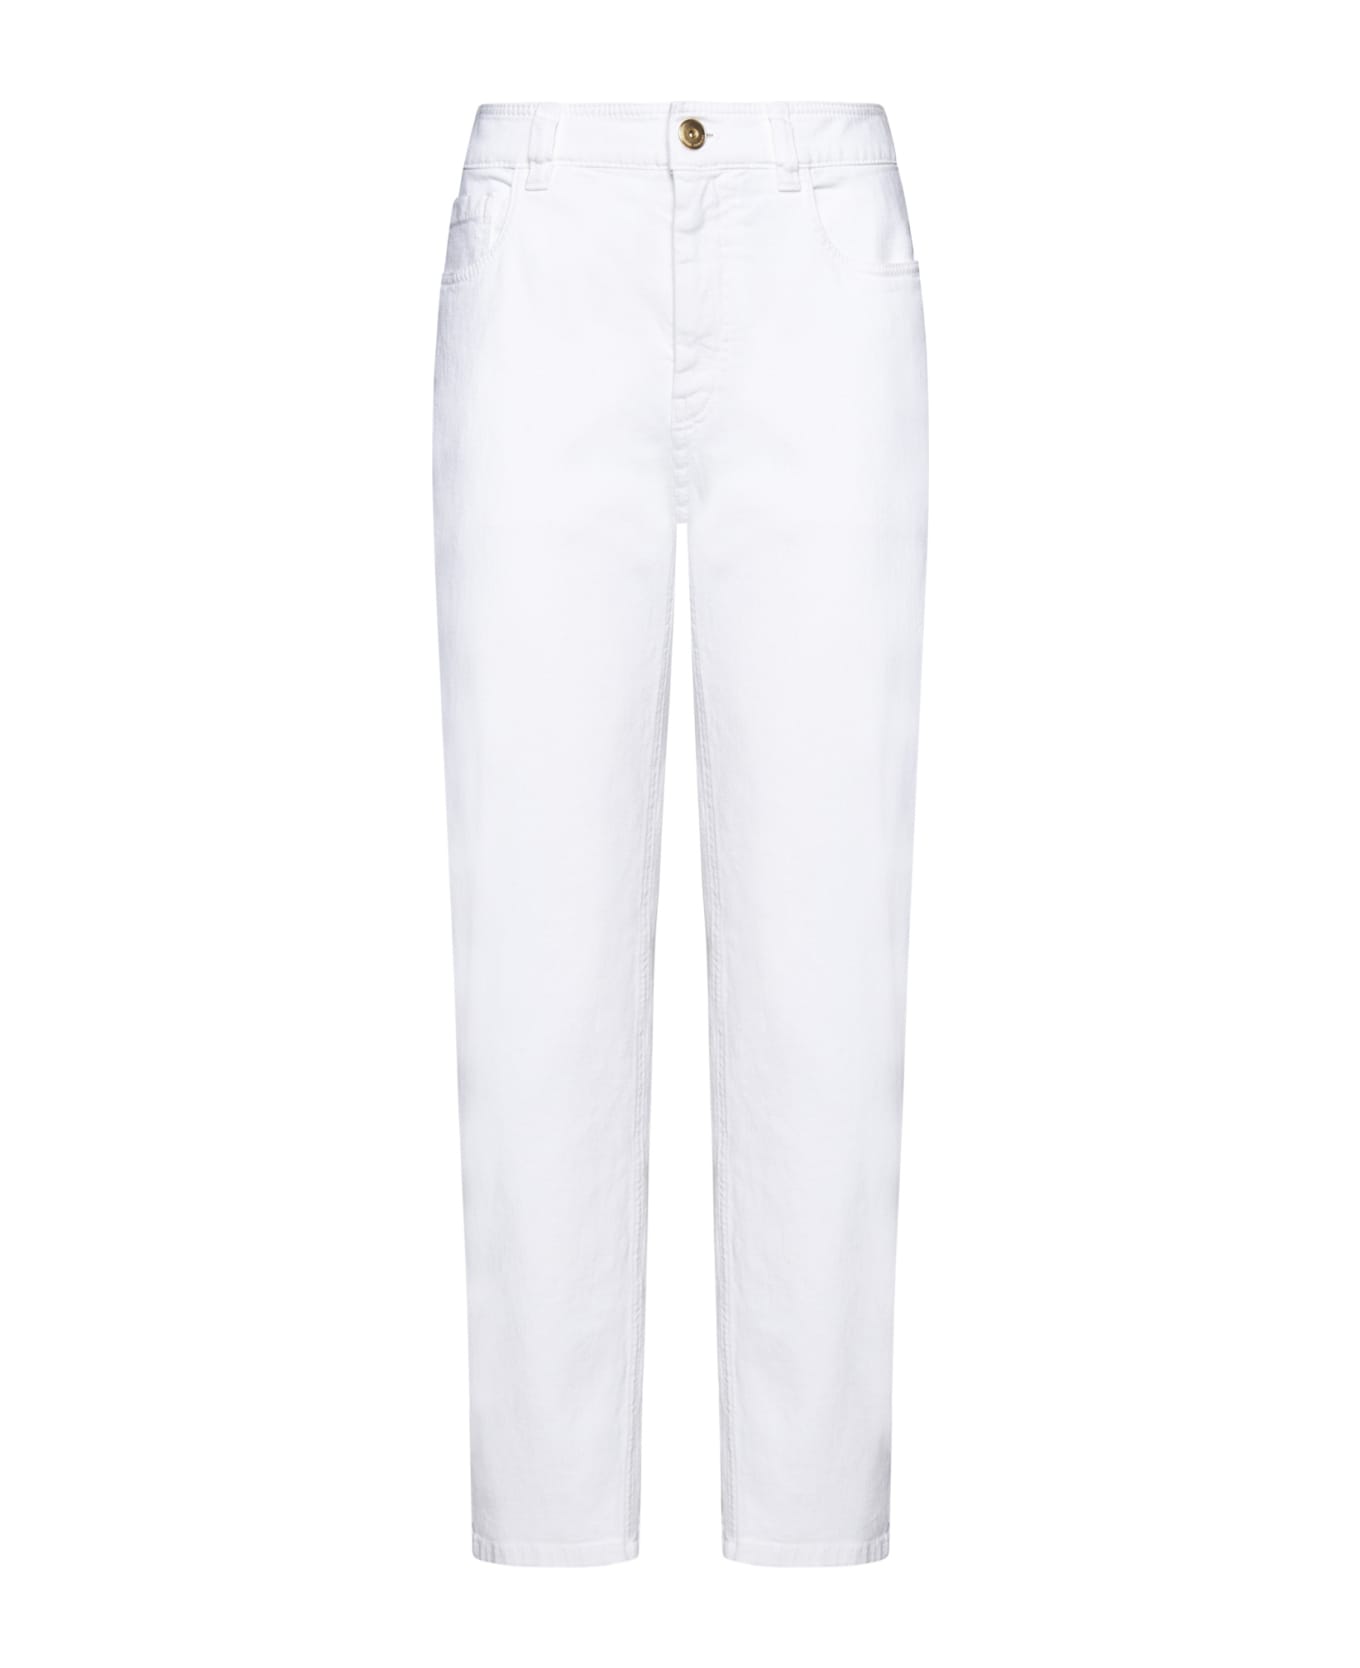 Brunello Cucinelli 5 Pockets Jeans With Monile Detail In Stretch Cotton Denim - White ボトムス